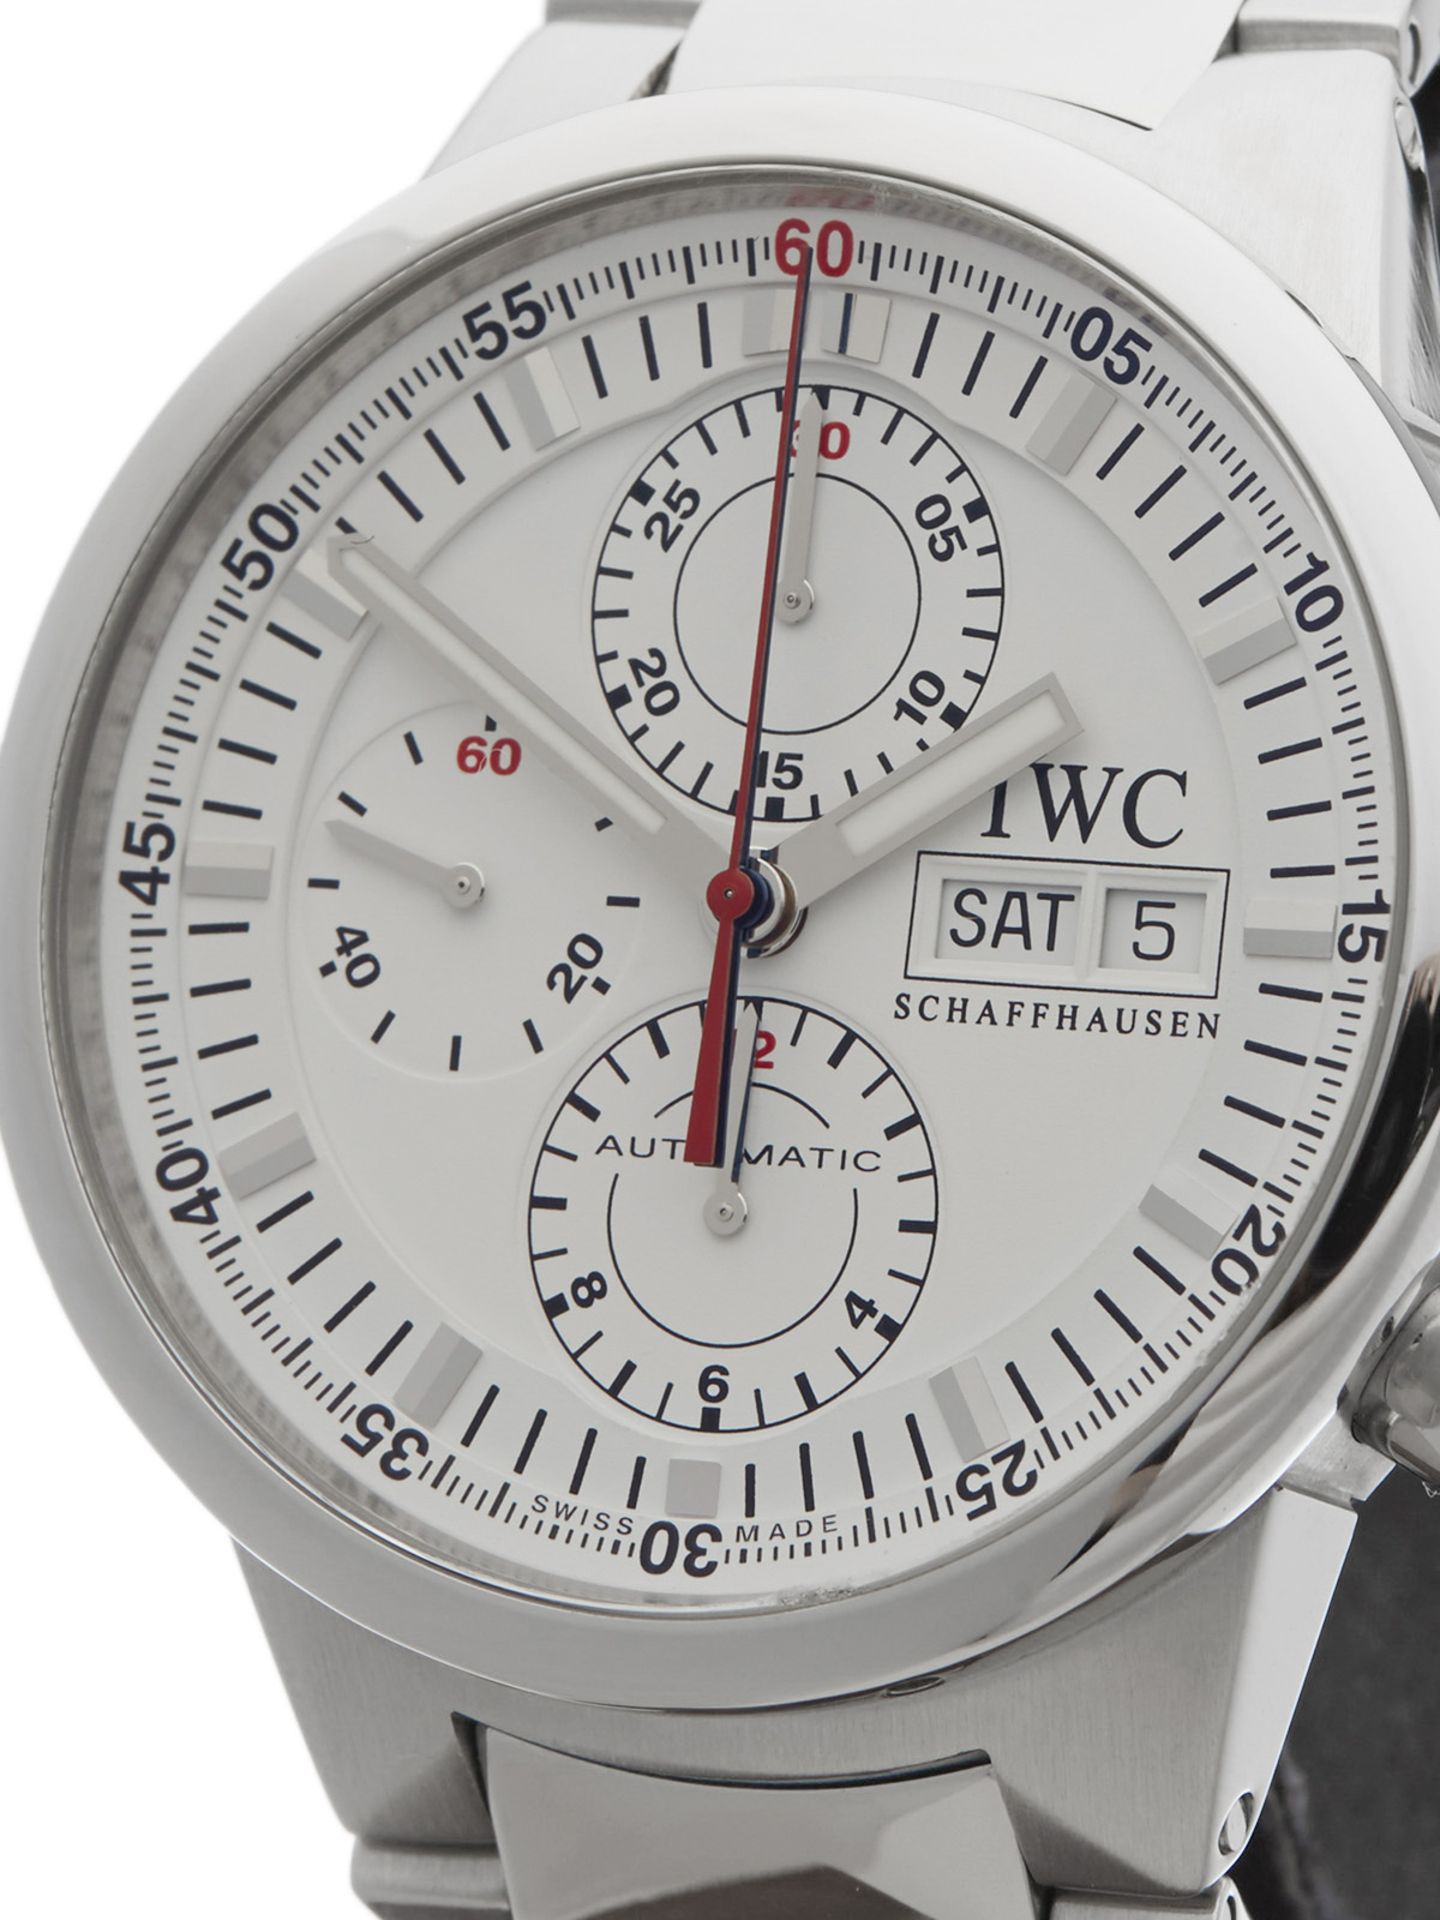 IWC GST Rattrapante 43mm Stainless Steel IW371523 - Image 3 of 9